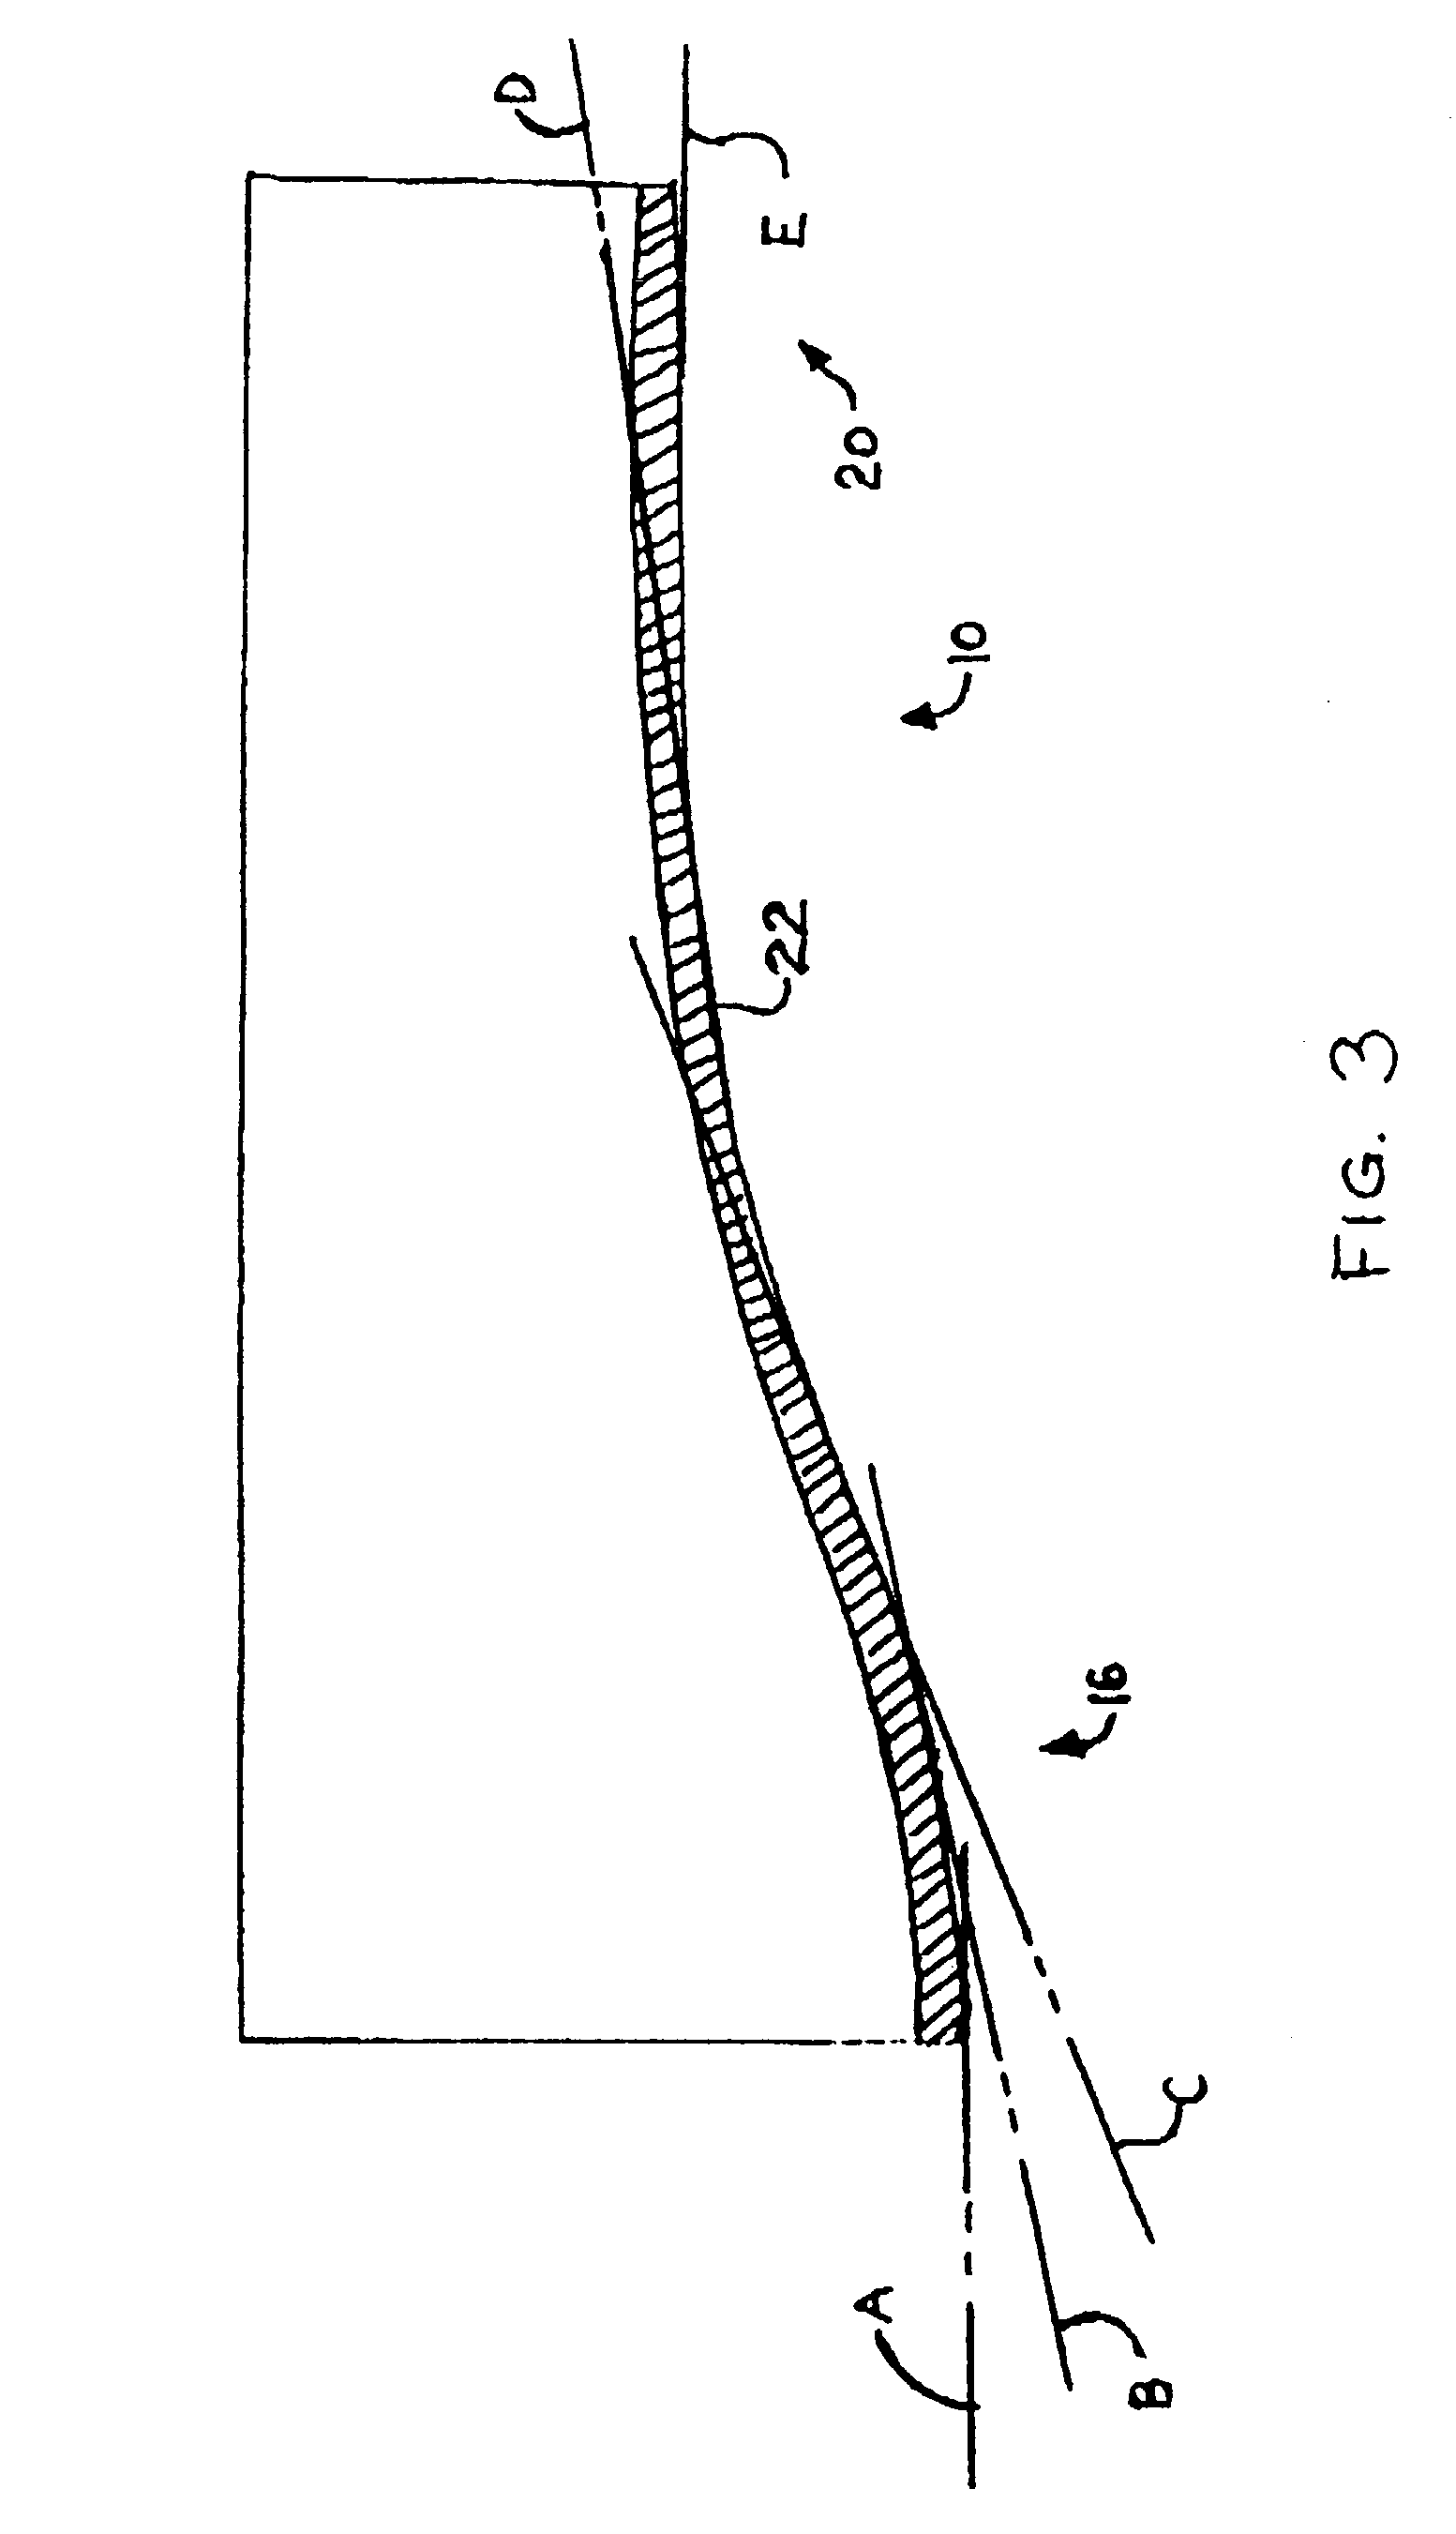 Tubular metallic simulated bamboo, method for manufacturing and articles fabricated therefrom